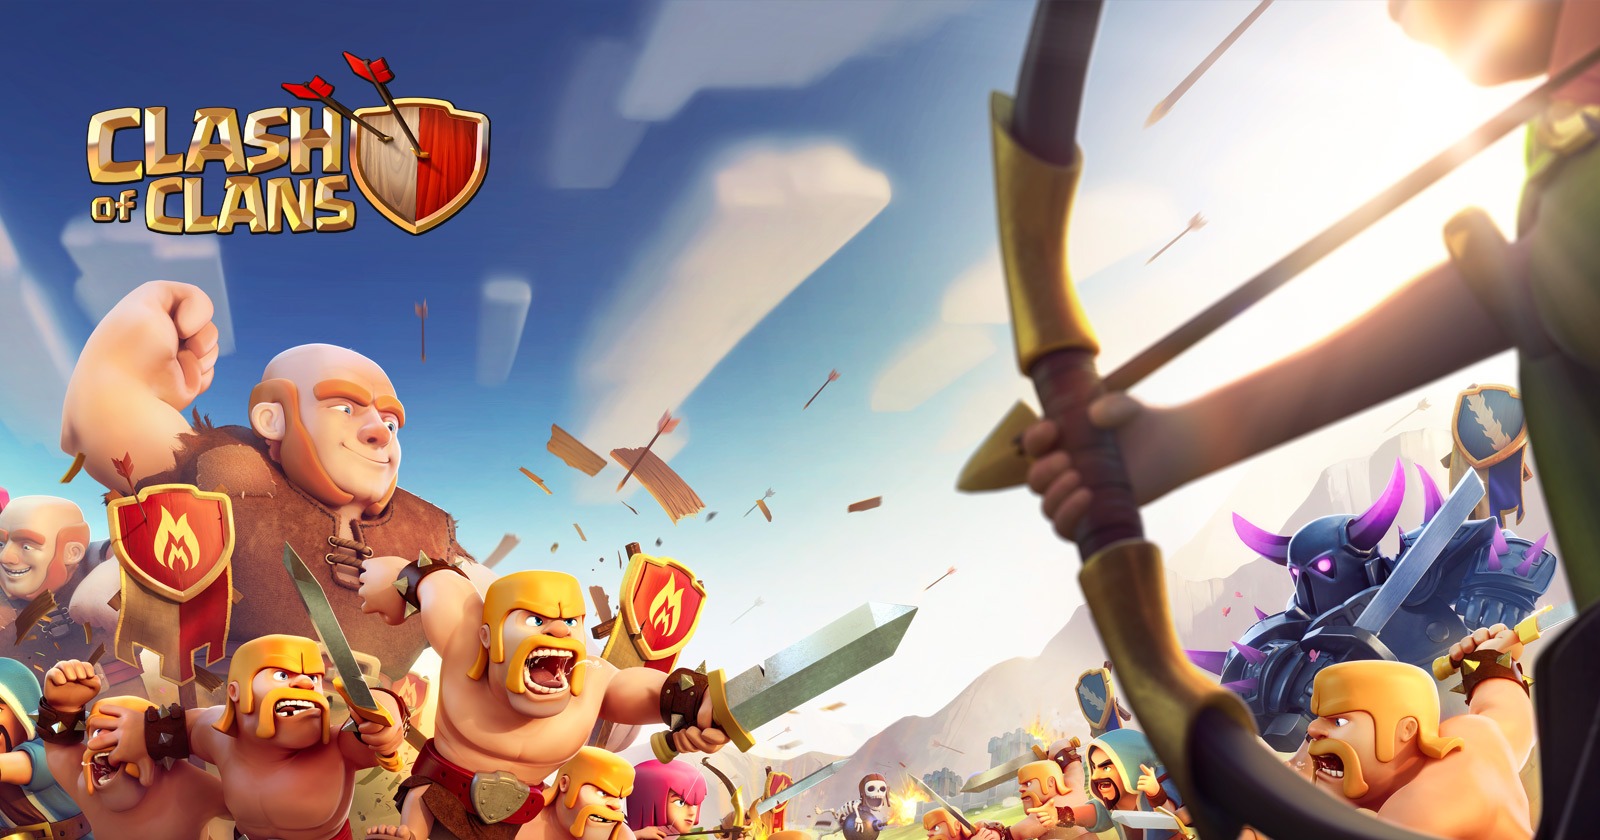 Clash of clans free download for pc